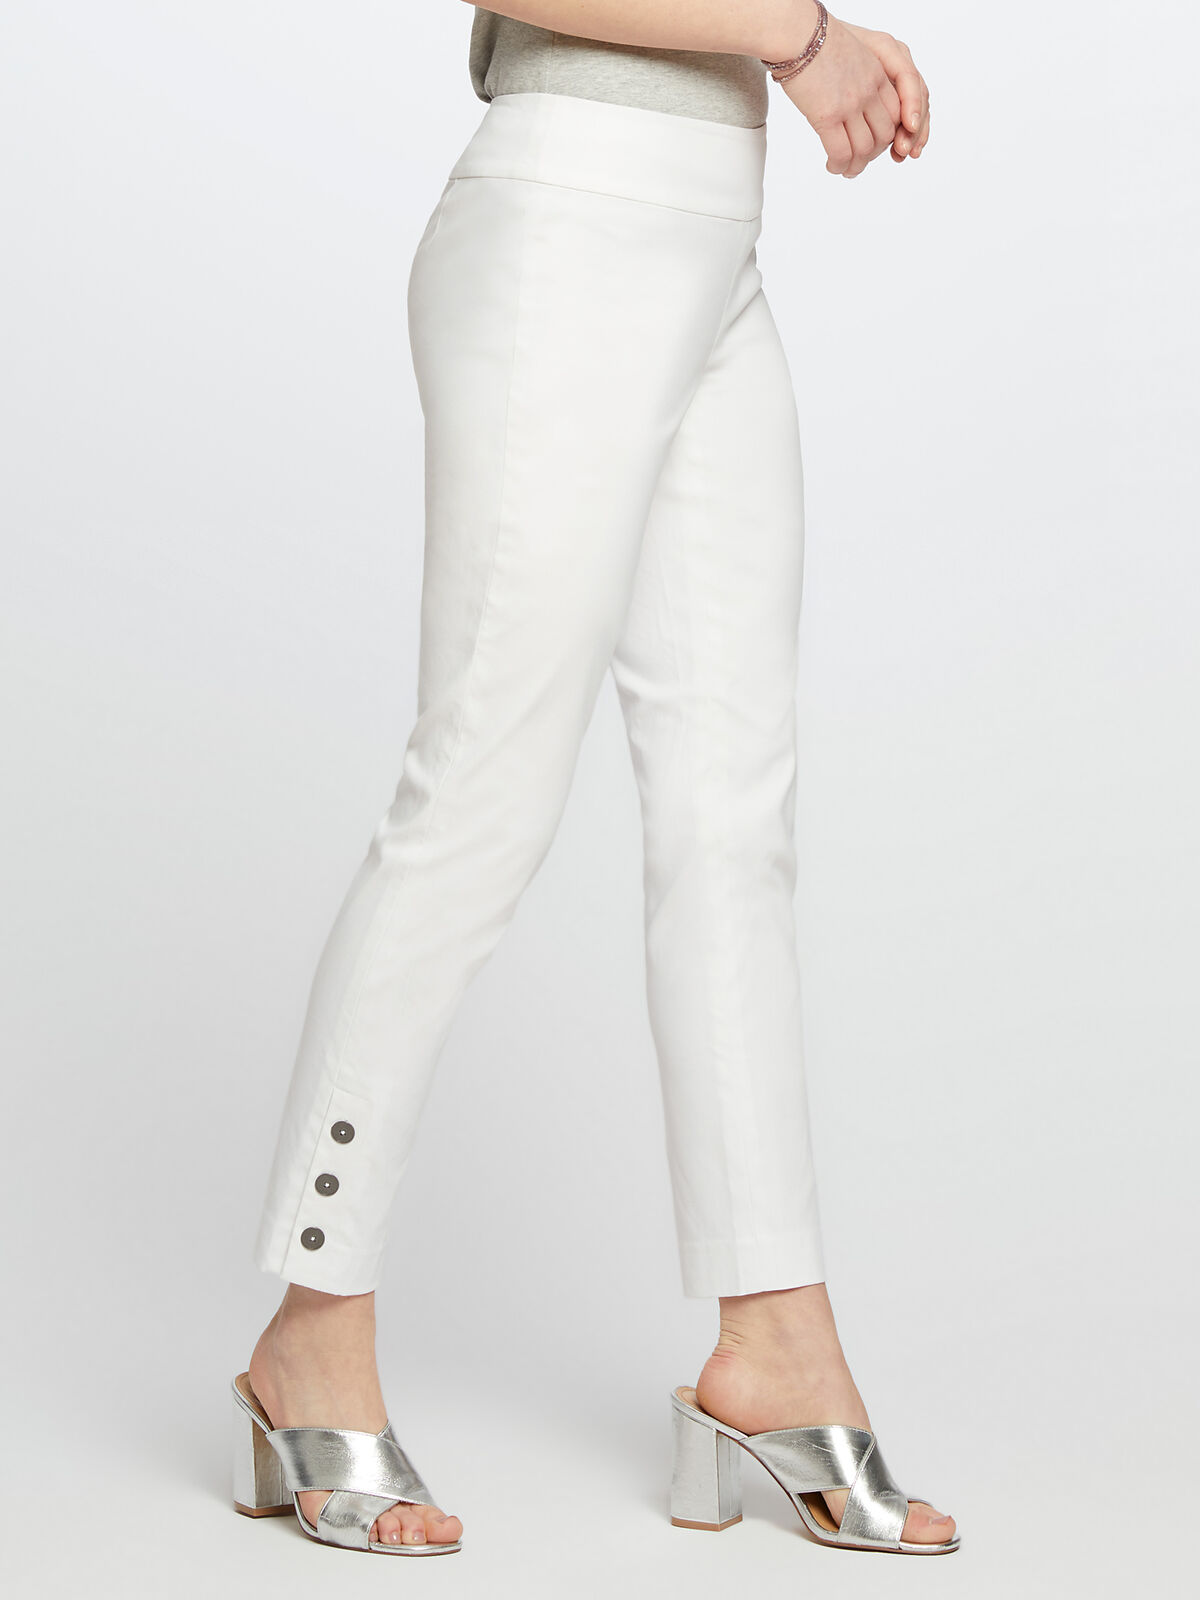  Buttoned Up Cotton Wonderstretch Pant